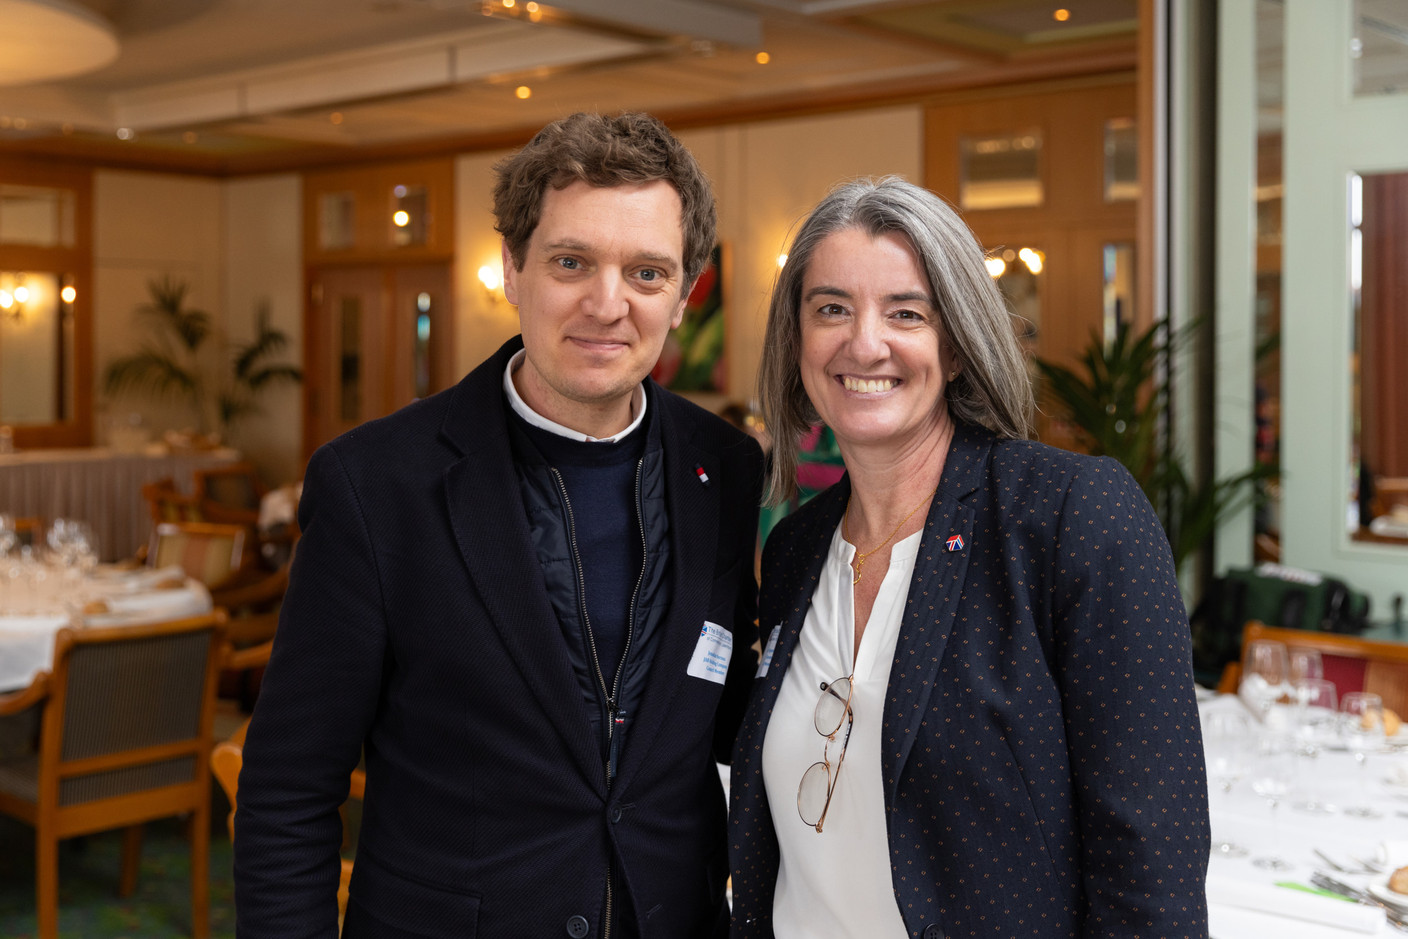 Jonathan Norman, tax counsel at JAB Holding Company, and Sara Speed of Alter Domus and a British Chamber of Commerce council member at the BCC & Amcham Personal Tax Lunch on 21 November 2023. Photo: Romain Gamba / Maison Moderne